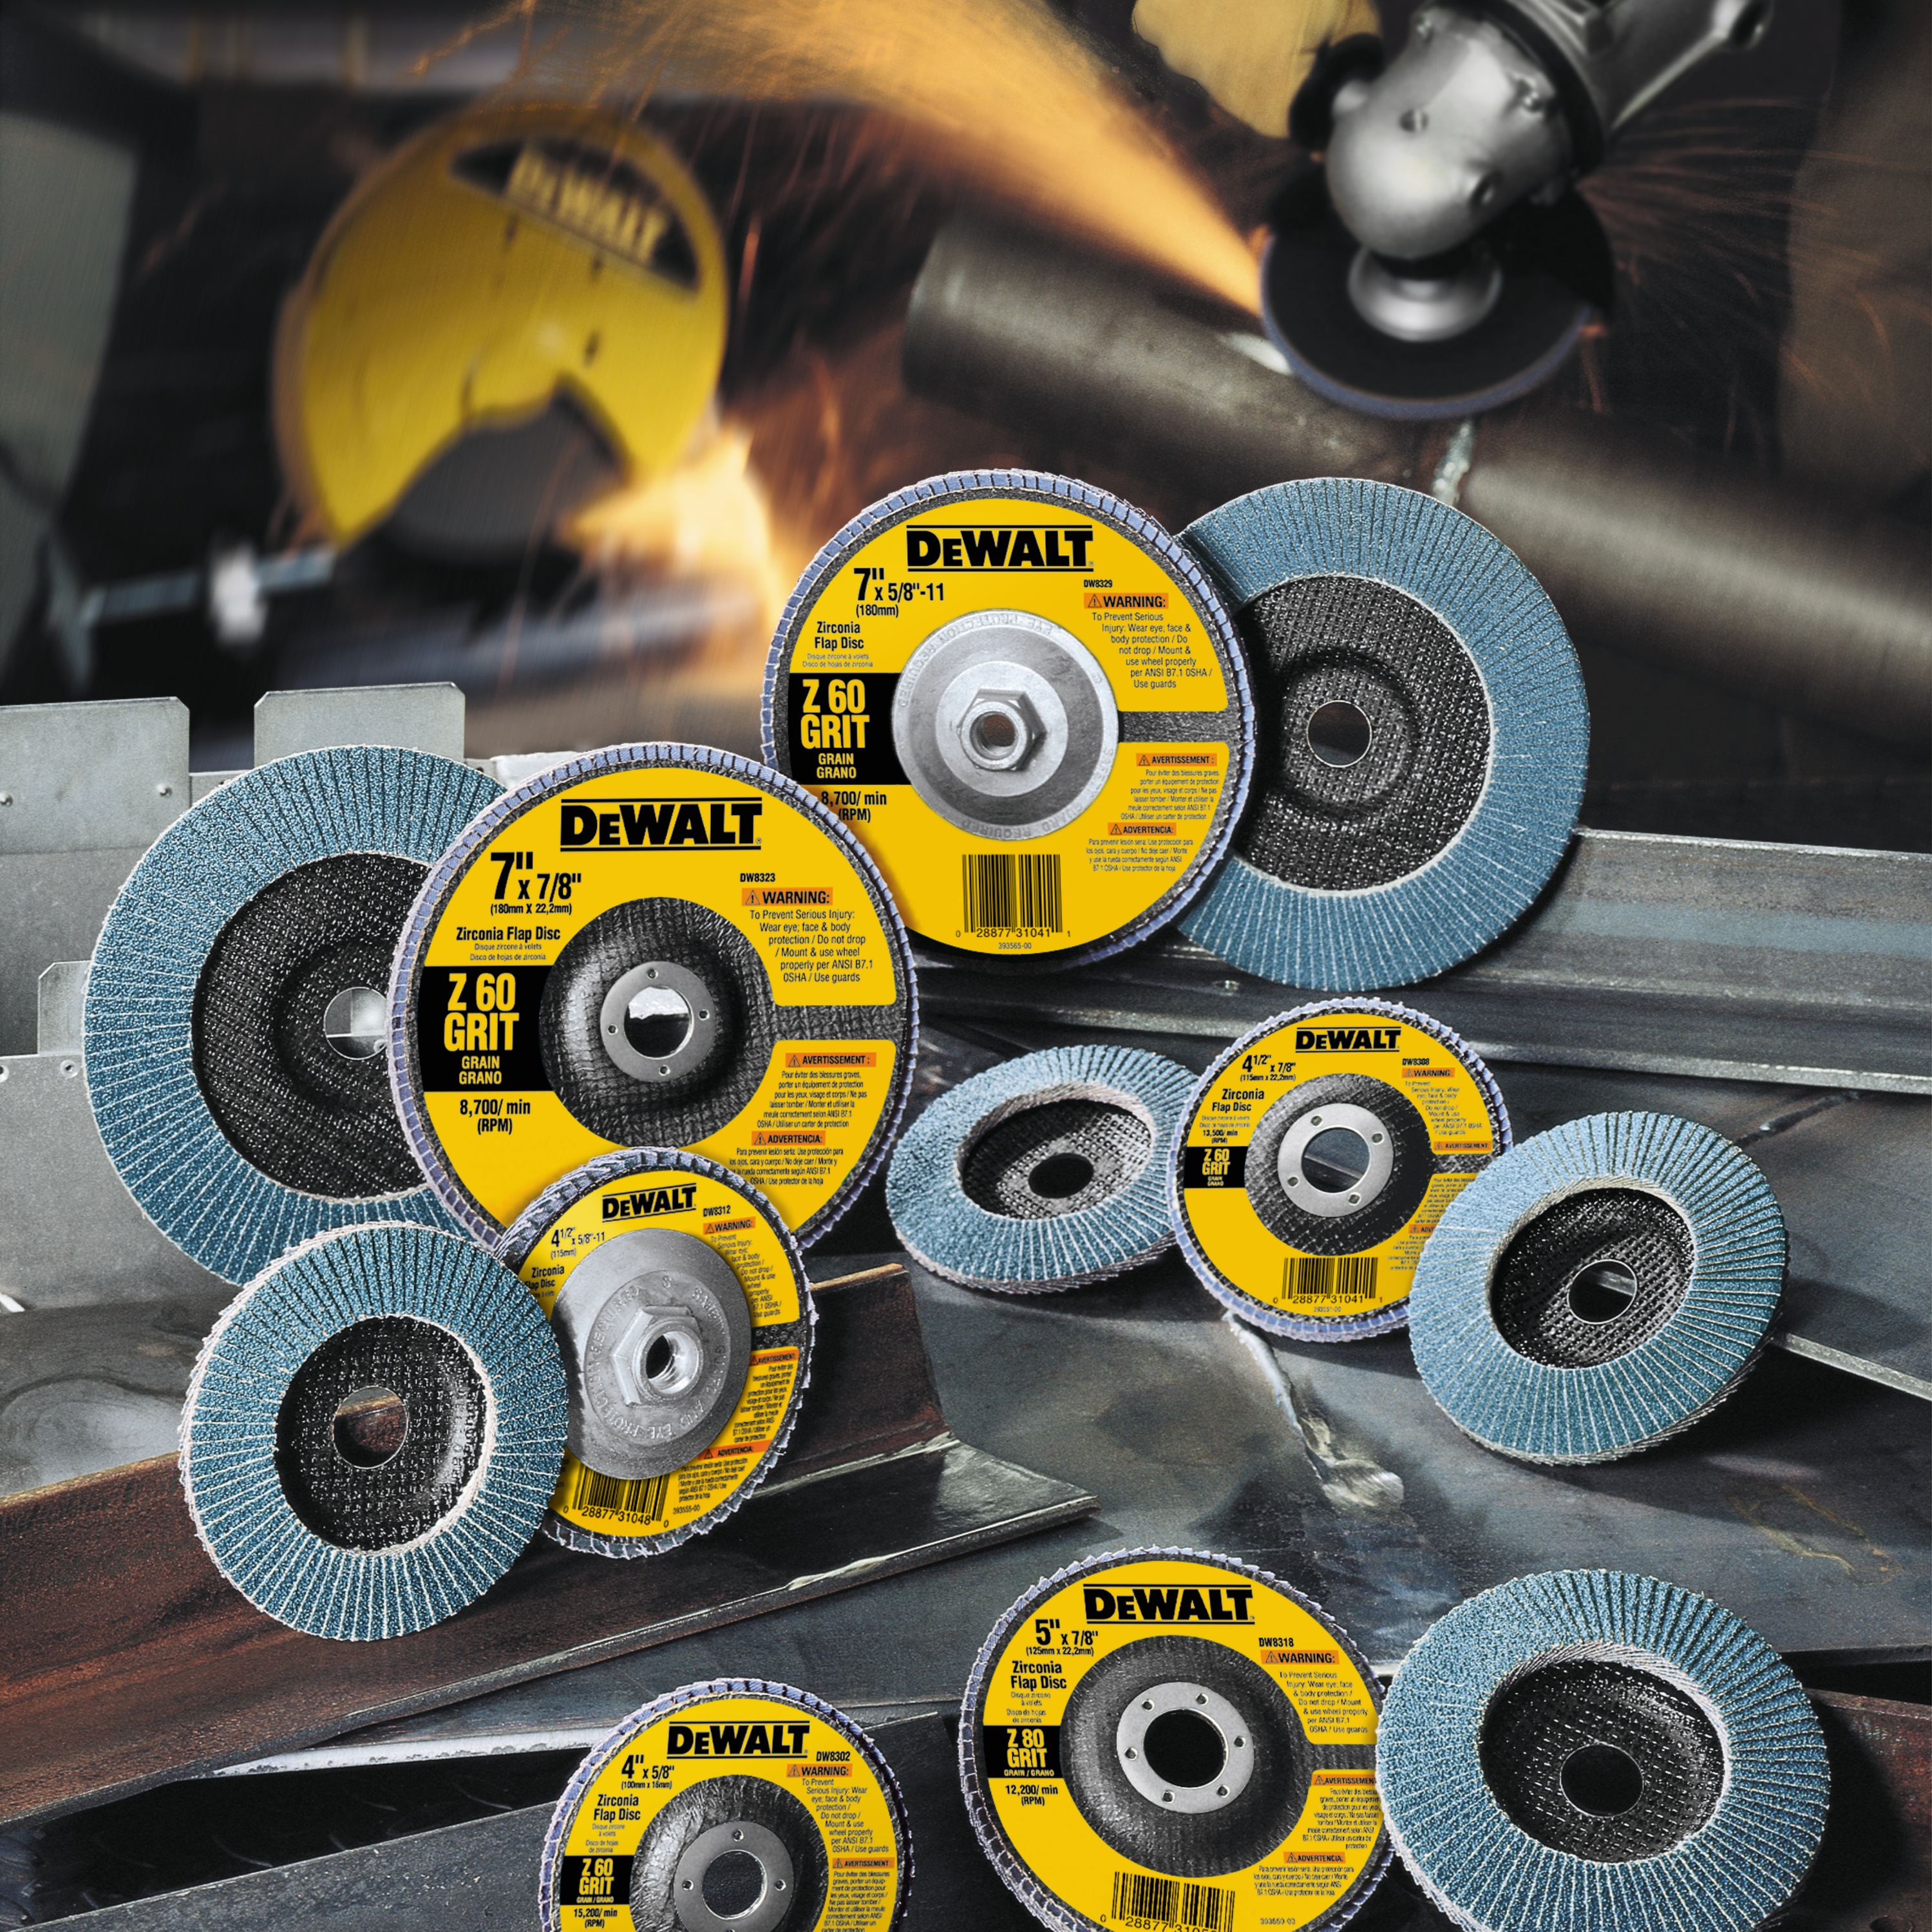 H P Flap Discs Type 27 featuring other tool discs arranged in a workspace.